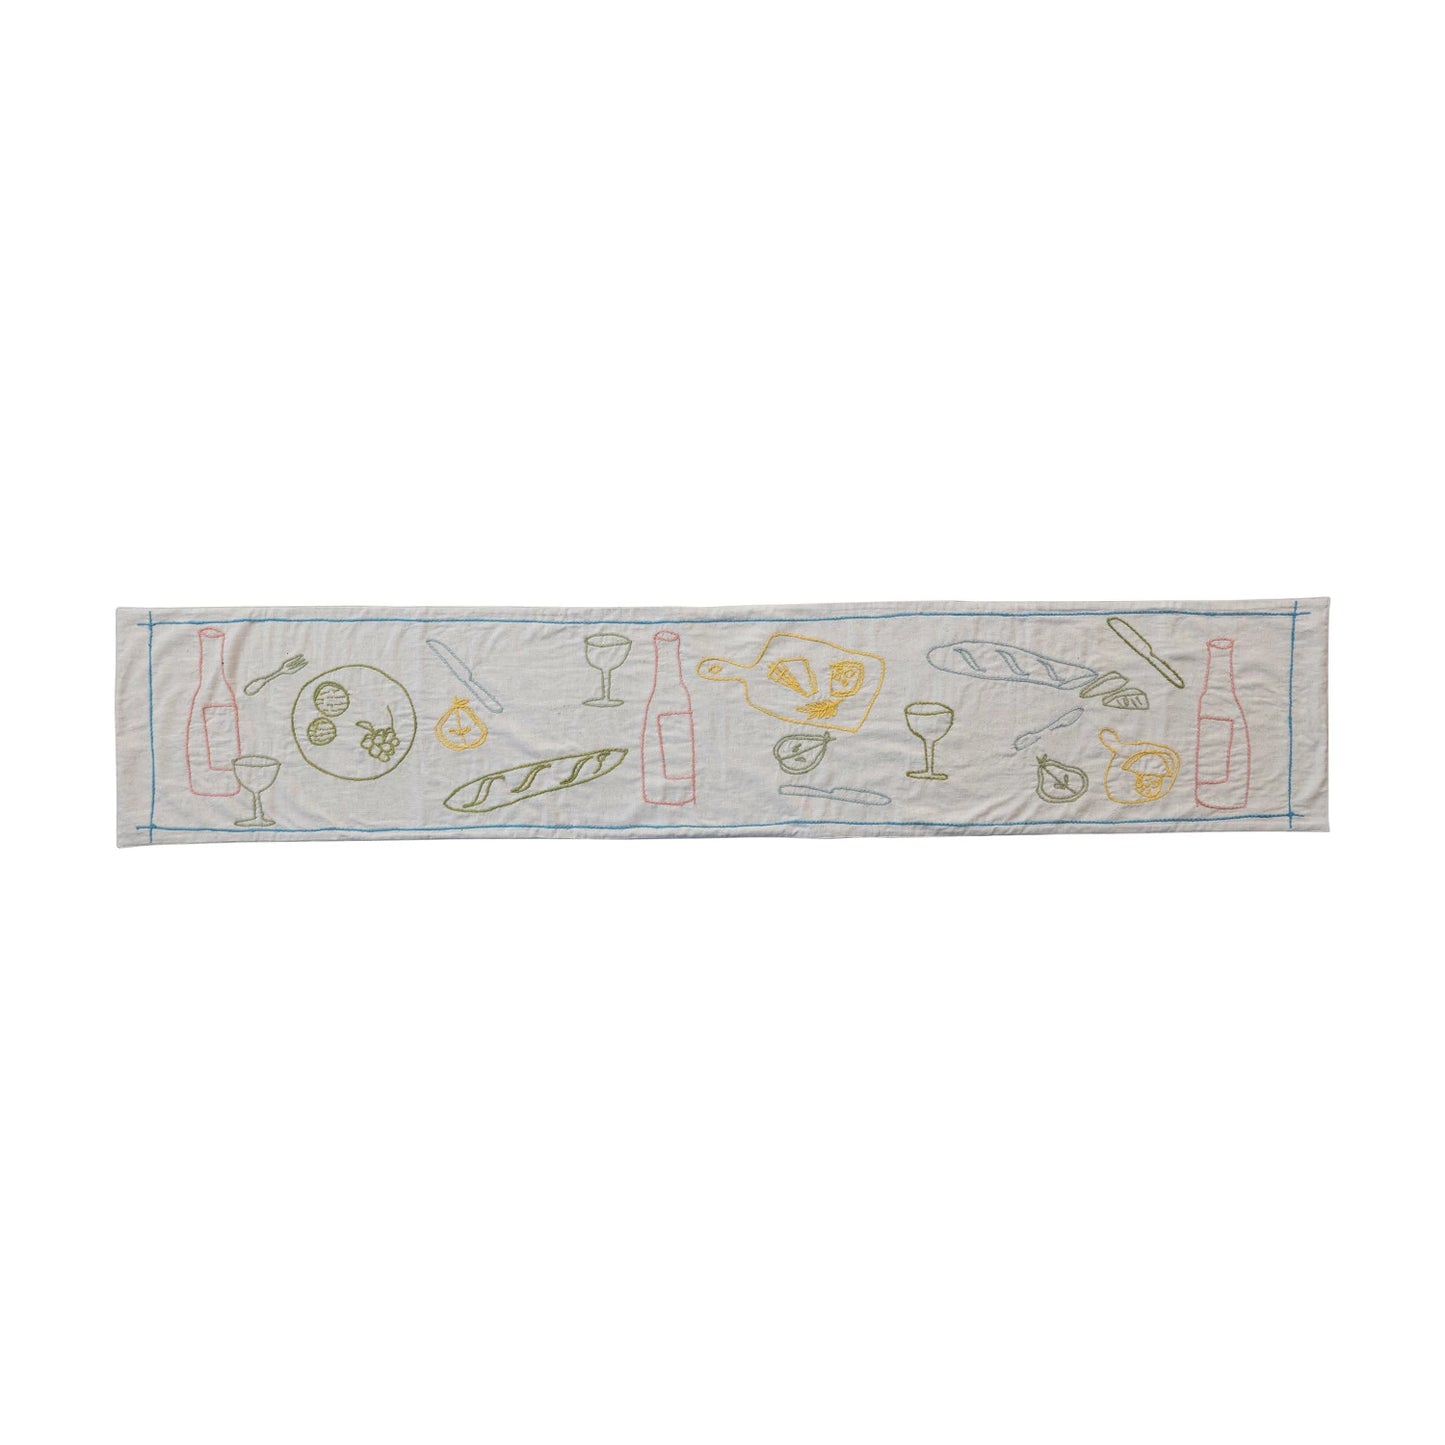 Embroidered Sketch Tablescape Runner